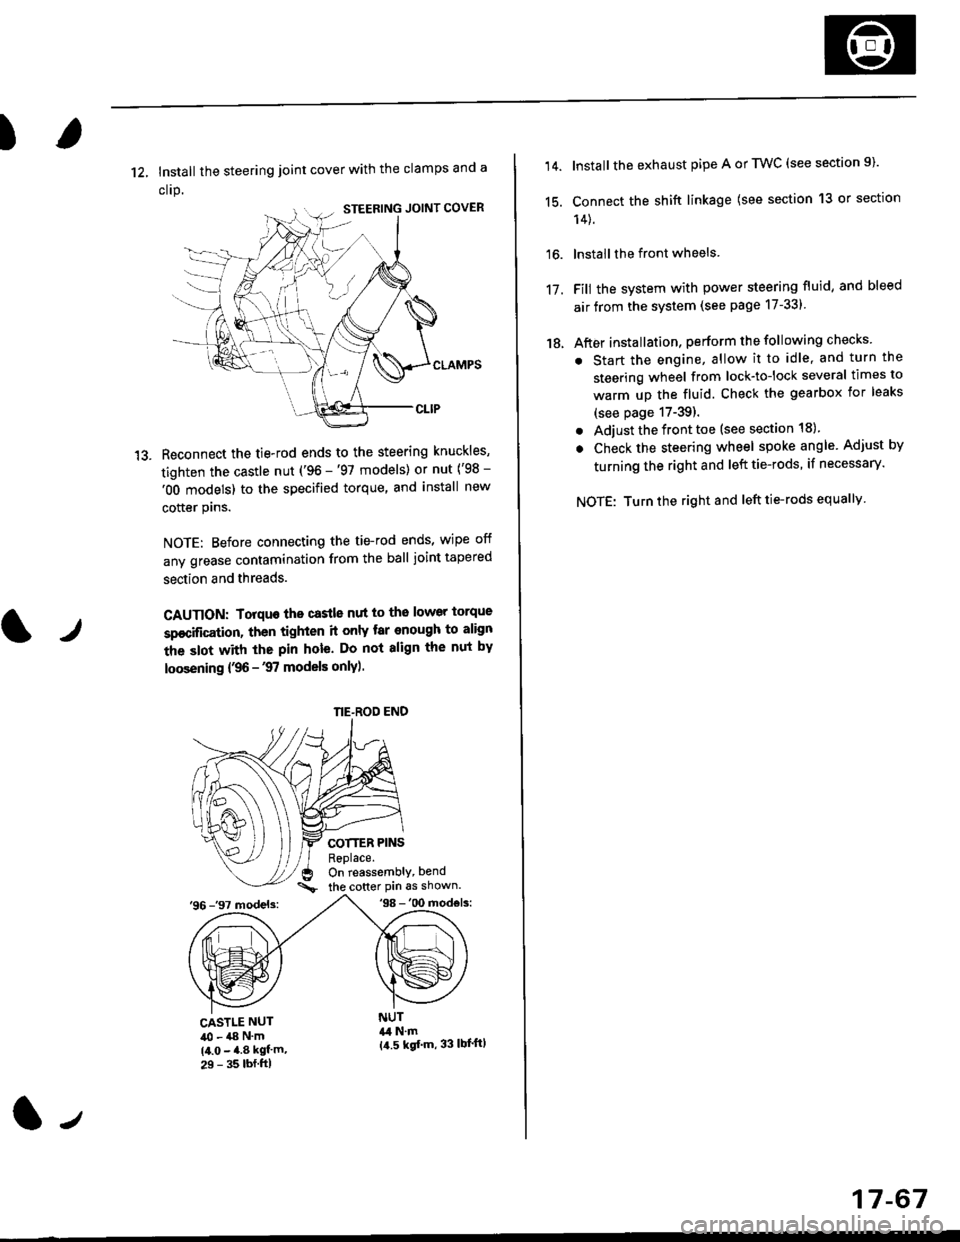 HONDA CIVIC 1997 6.G Owners Guide )
1?
12, Install the steering joint cover with the clamps and a
clrp.
Reconnect the tie-rod ends to the steering knuckles,
tighten the castle nut (96 -97 models) or nut (98 -
OO models) to the spe